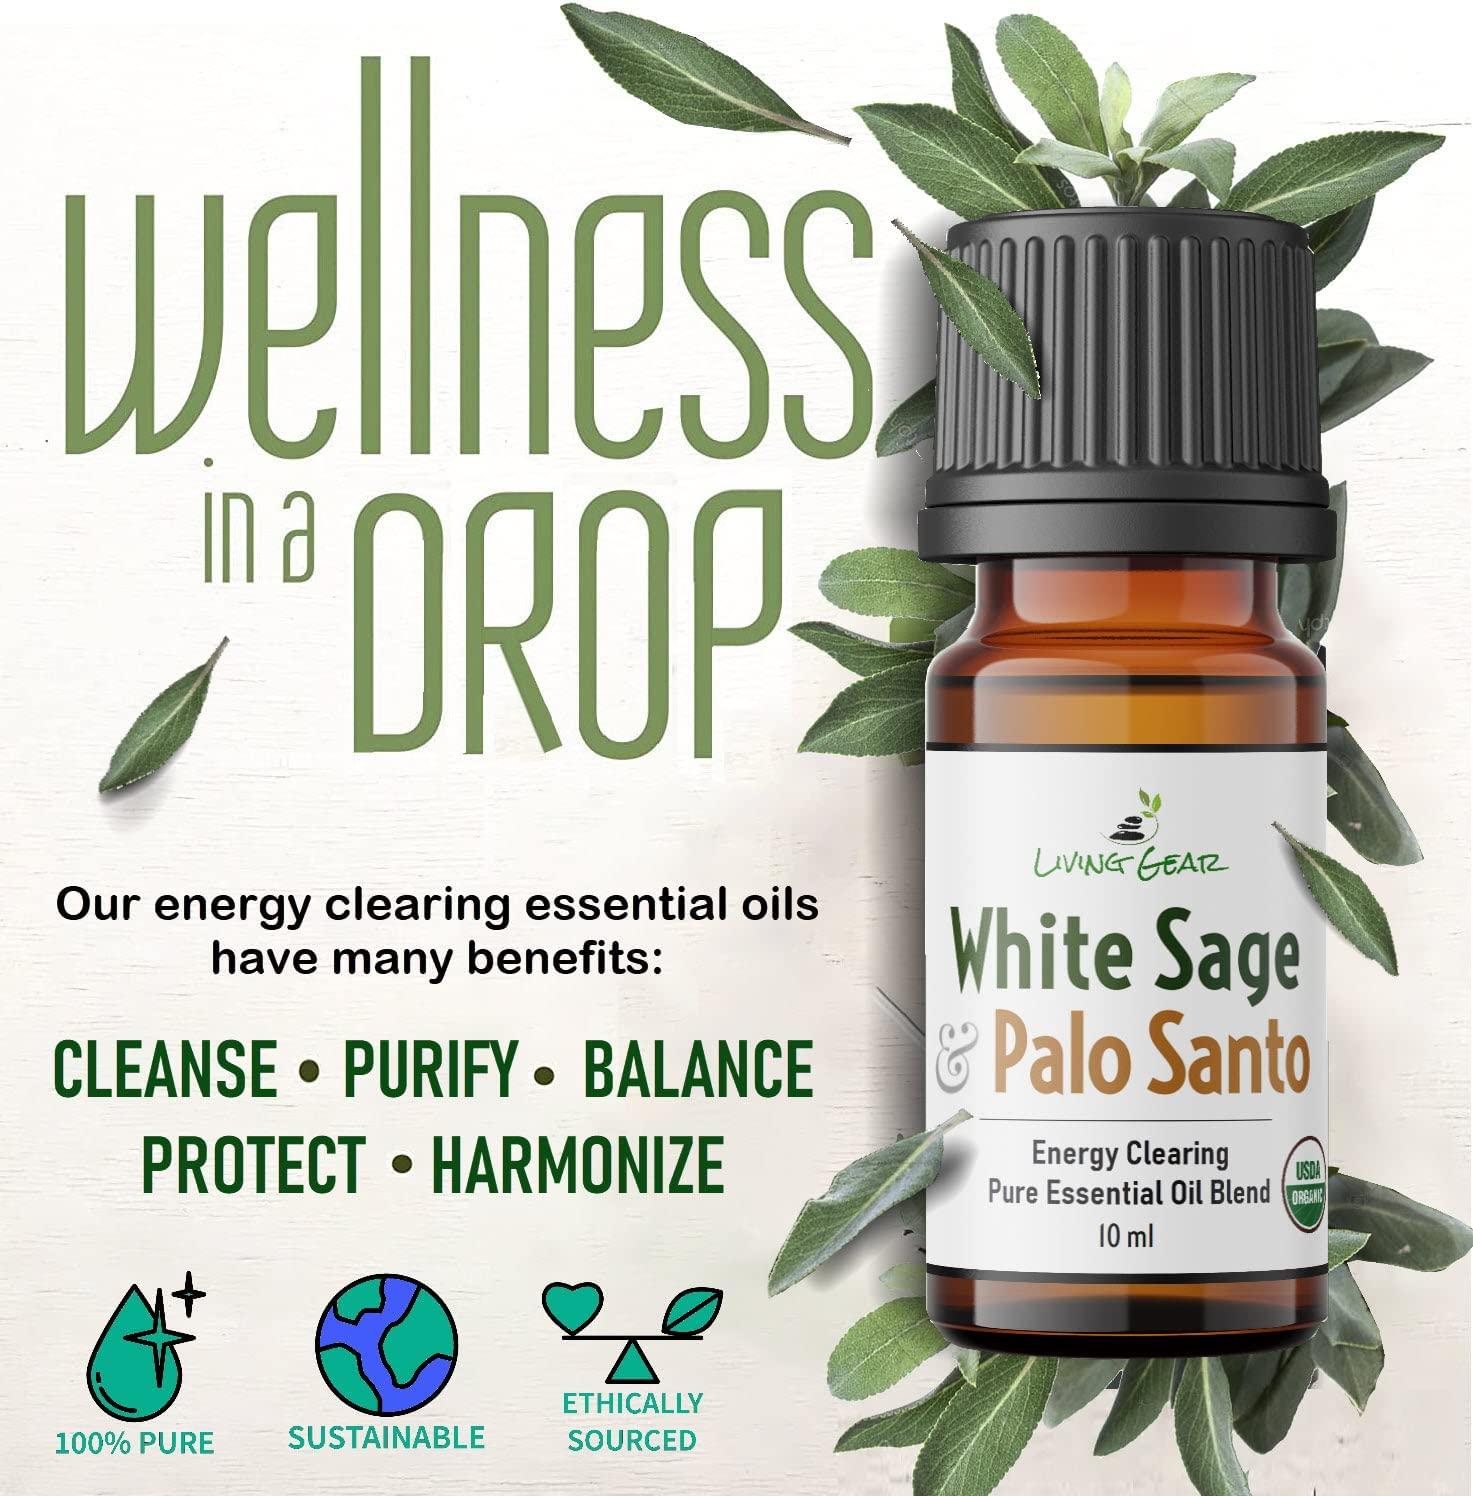 White Sage & Palo Santo Purification Essential Oil - Clears Negative Energy  - for Diffusers, Meditation, Yoga & All Spiritual Purposes - A Smoke-Free  Alternative to Burning Sage -10ml